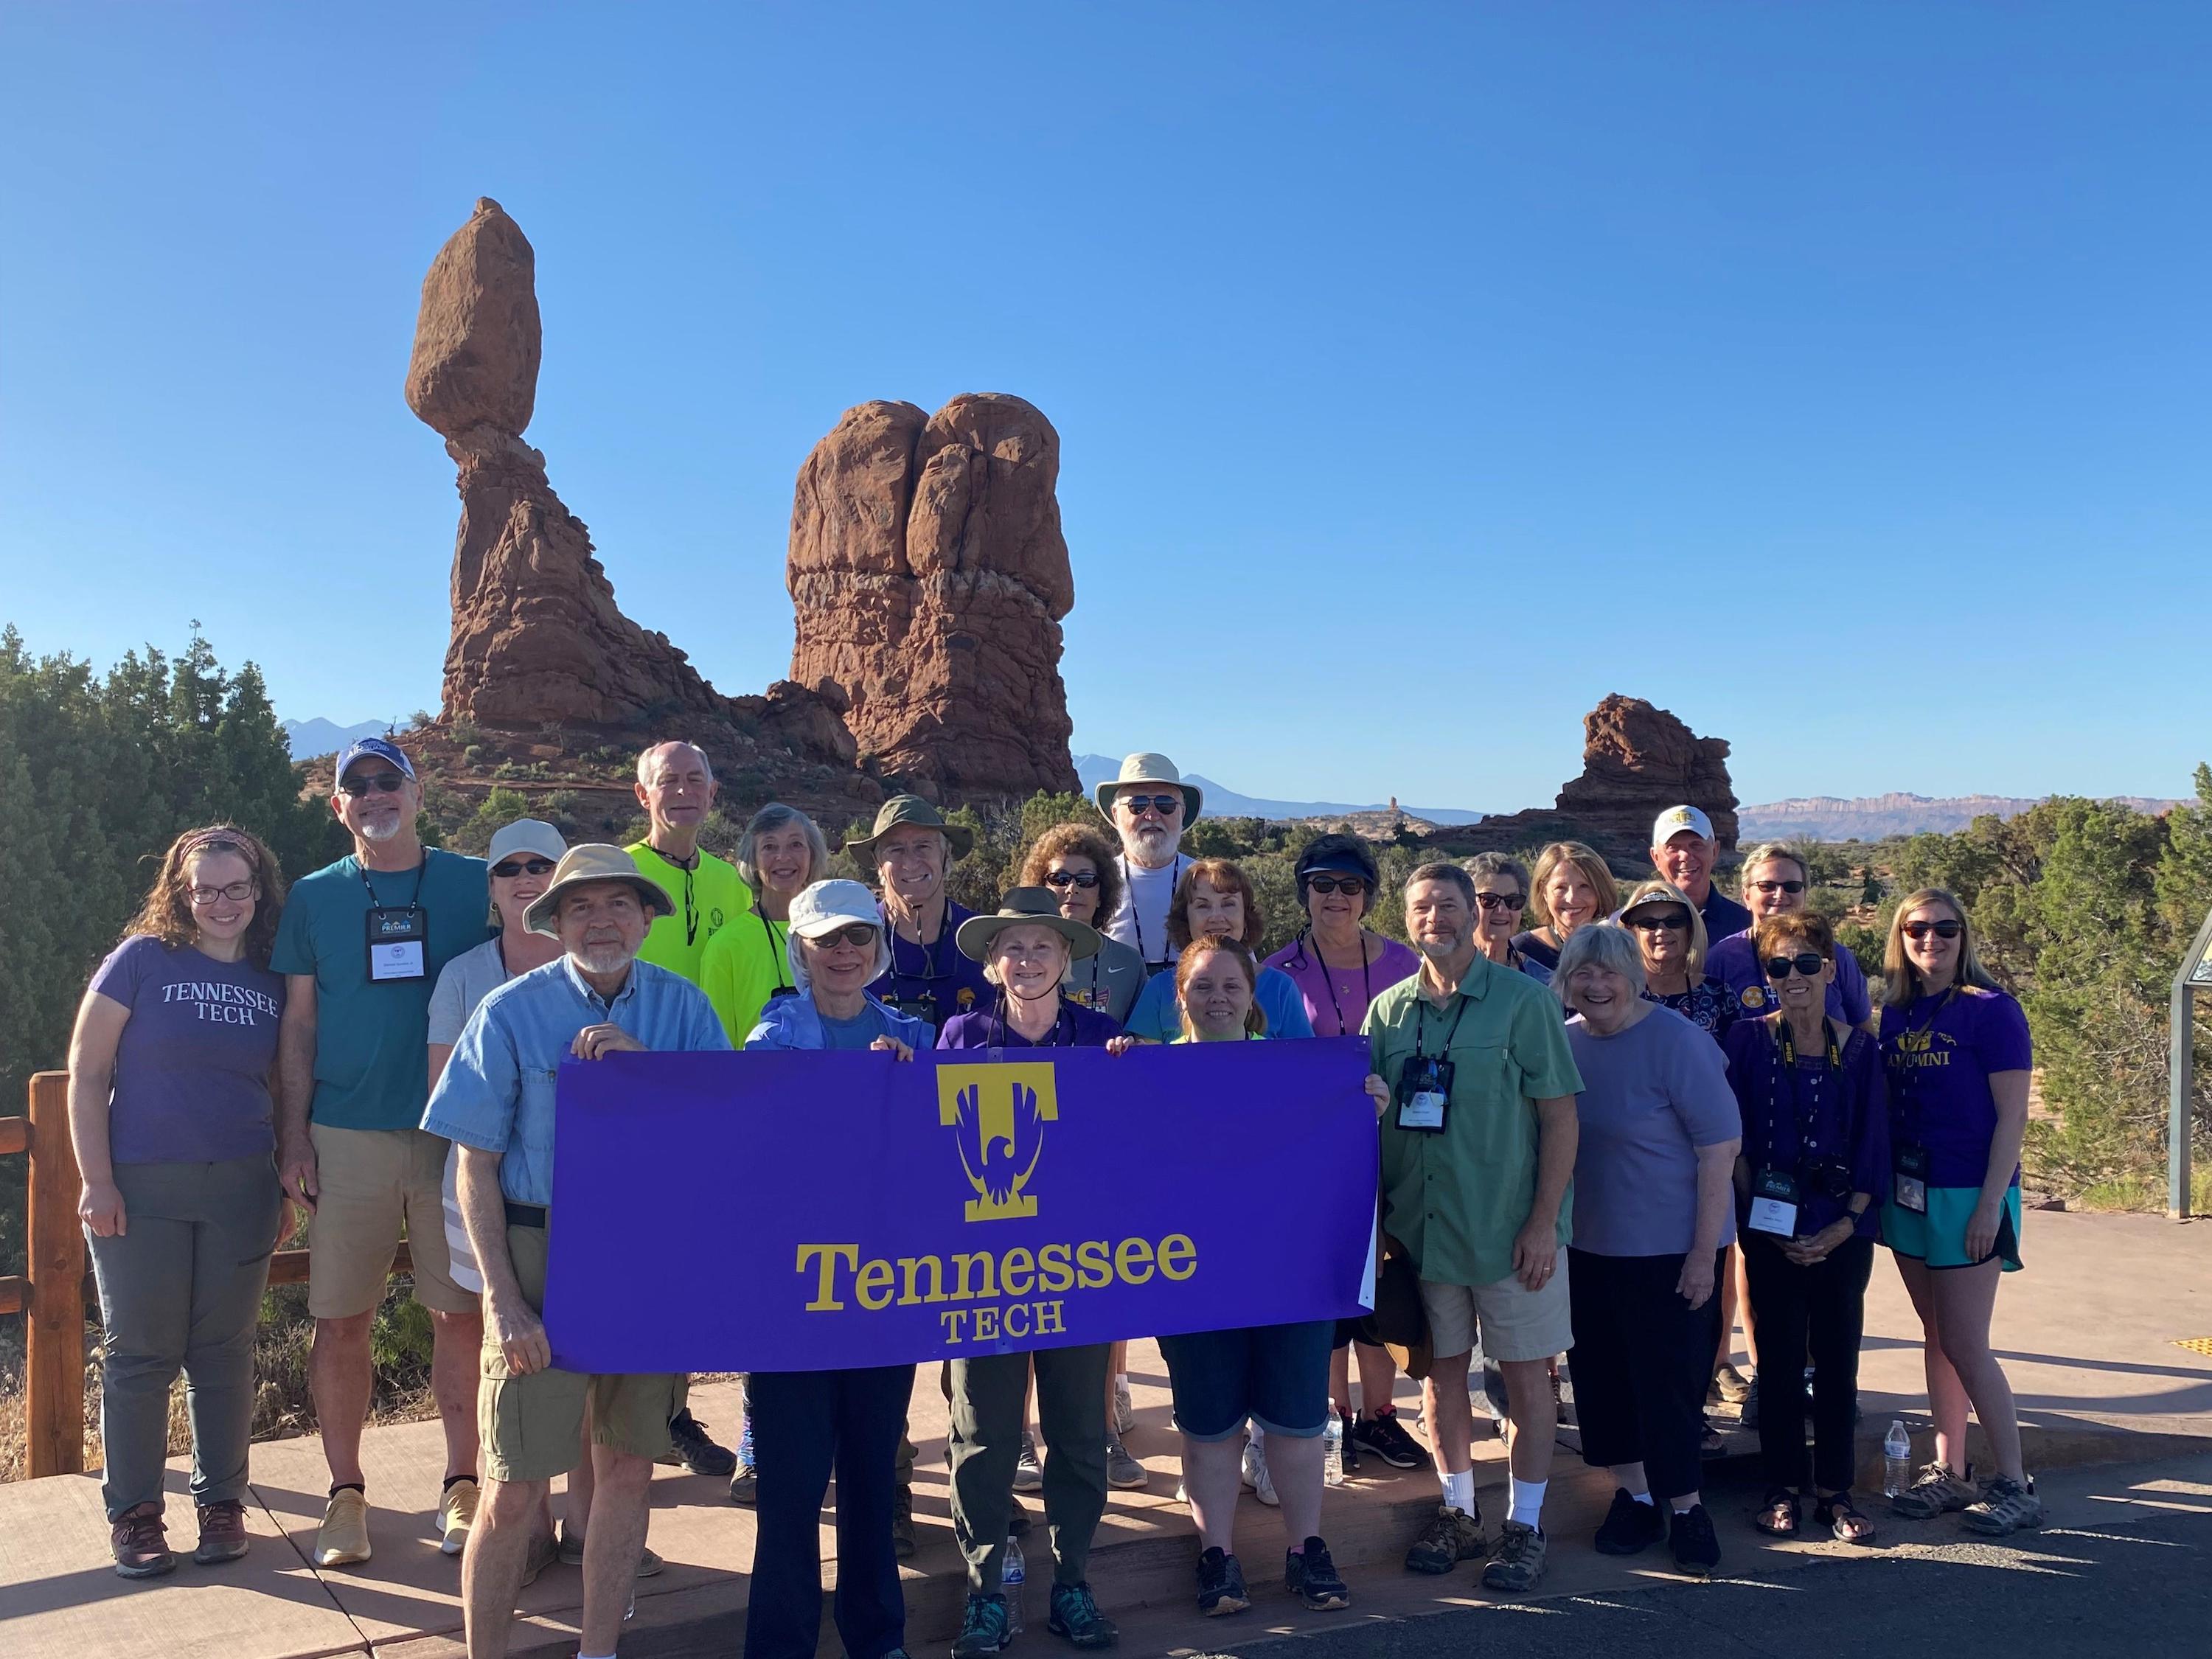 A group of alumni hold a Tennessee Tech banner in front of balancing rock at Arches National Park